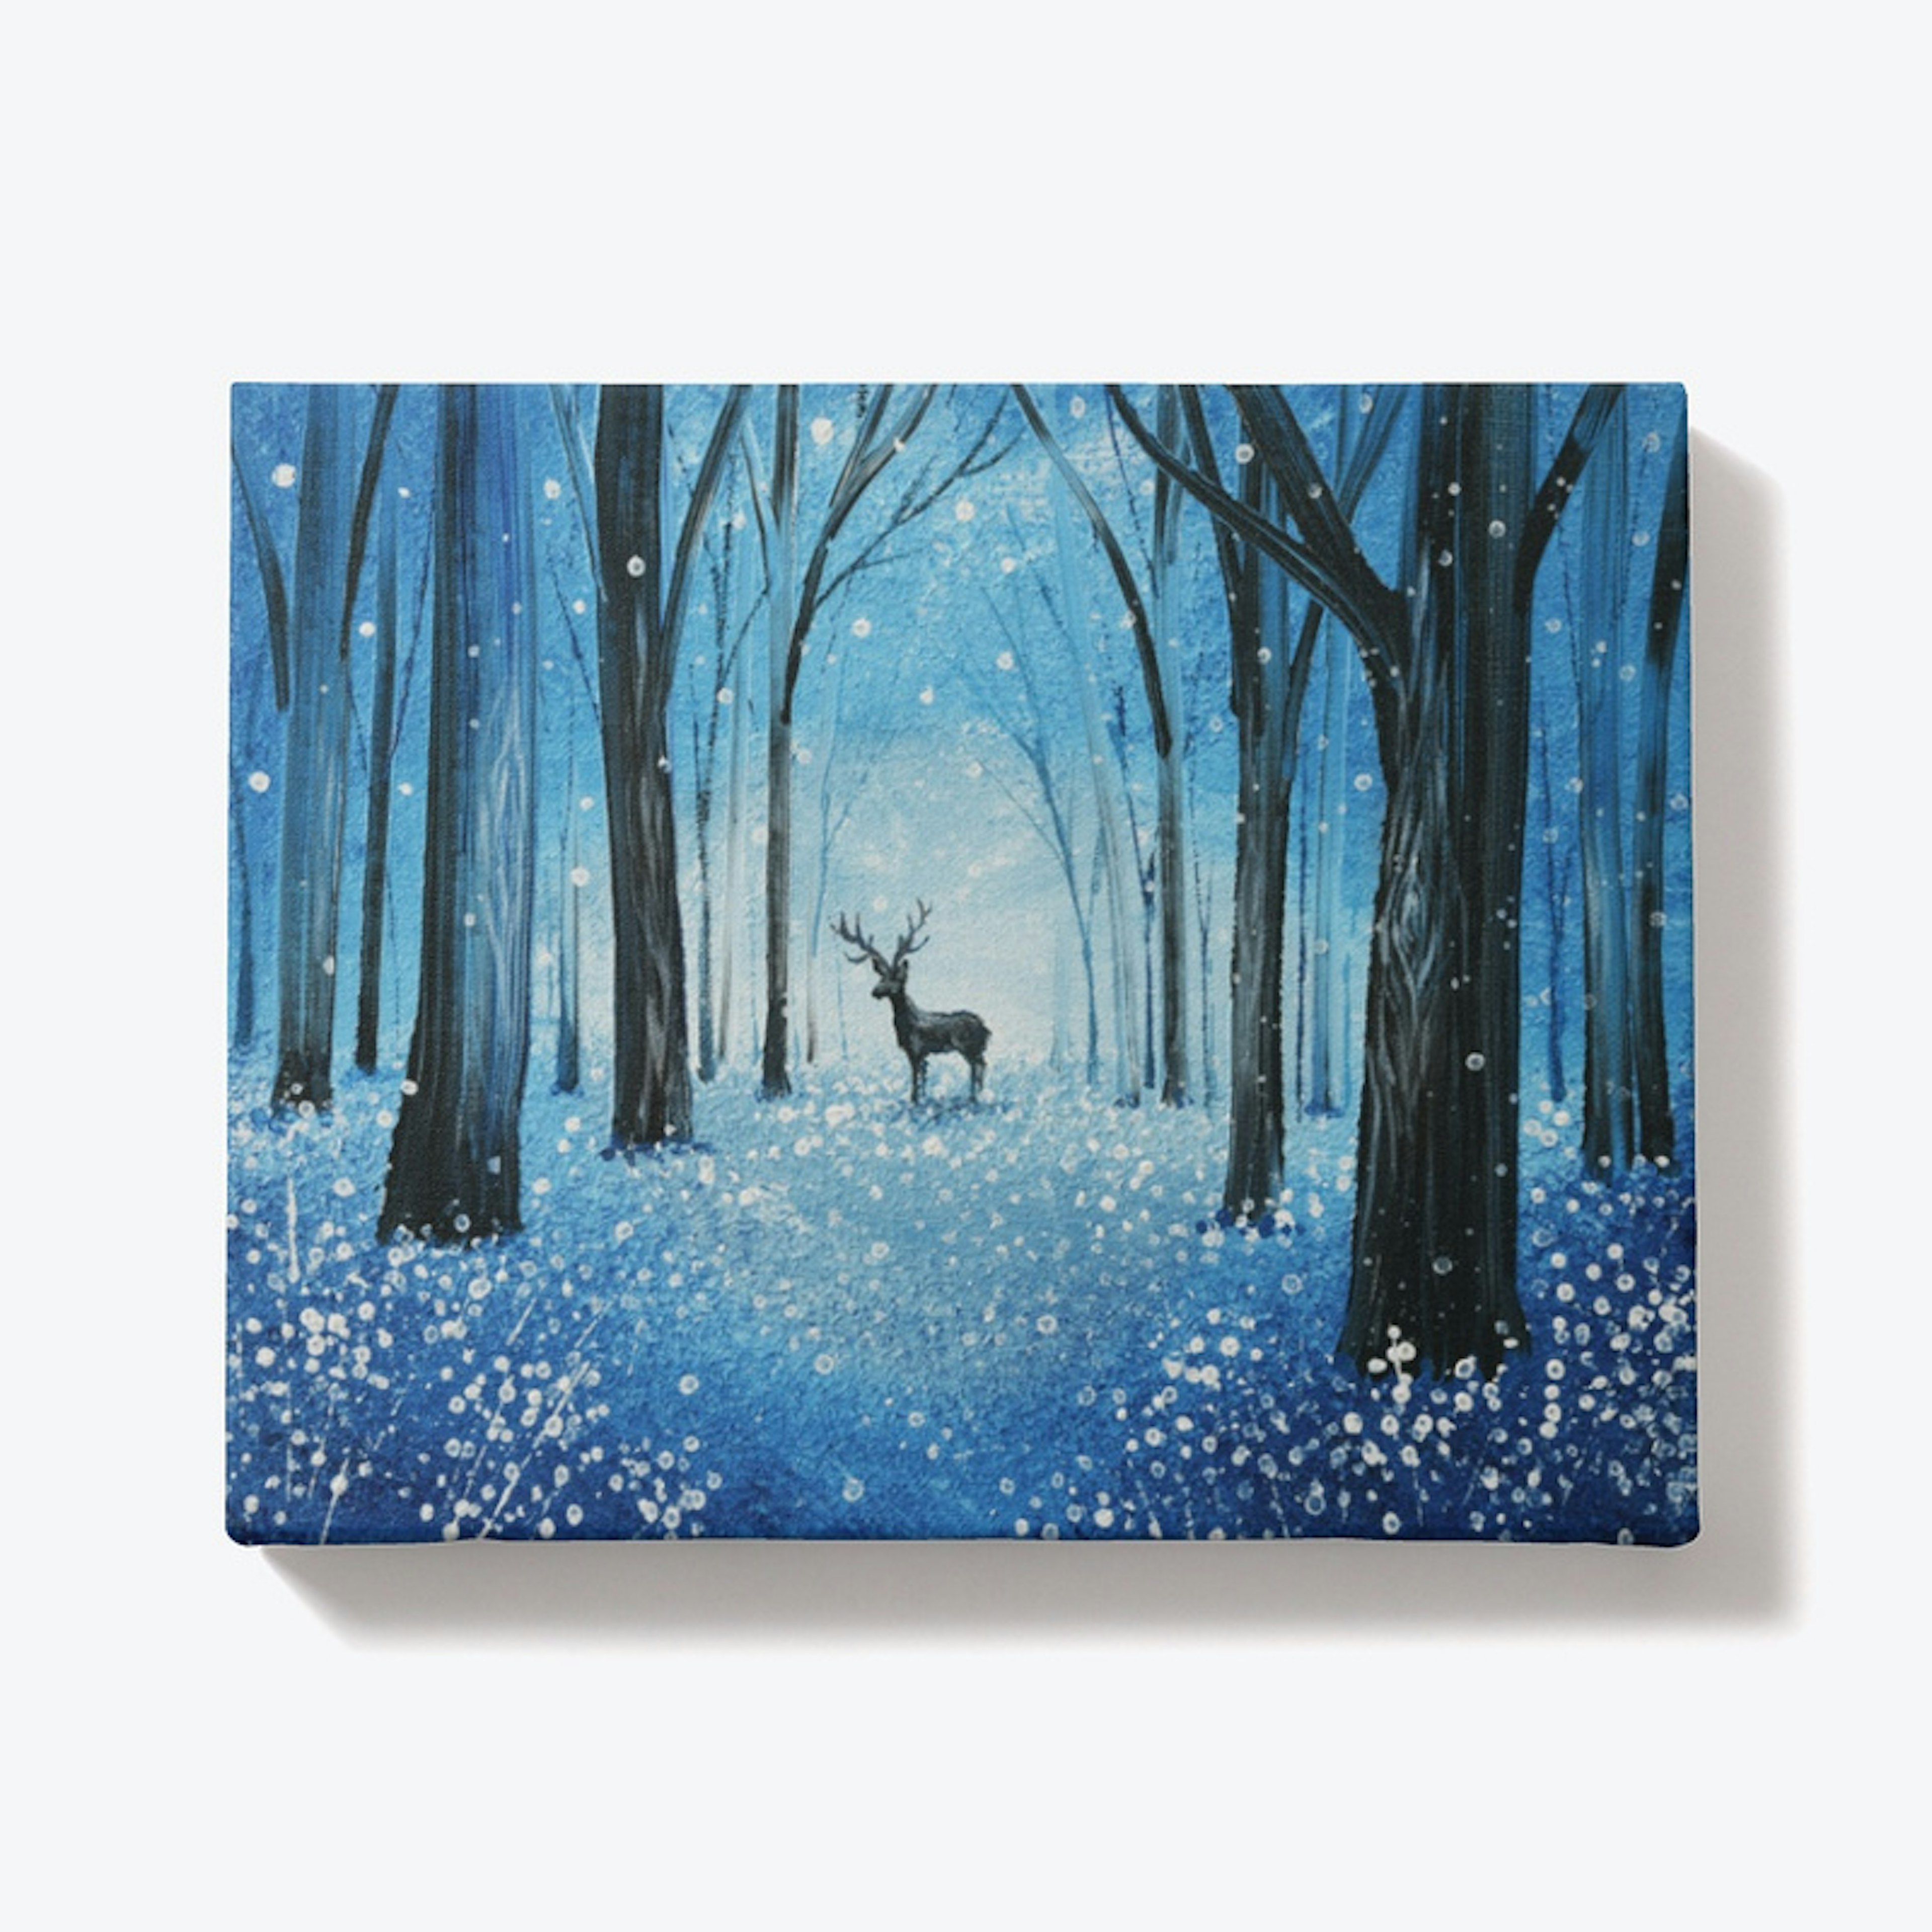 A Deer in Blue Forest